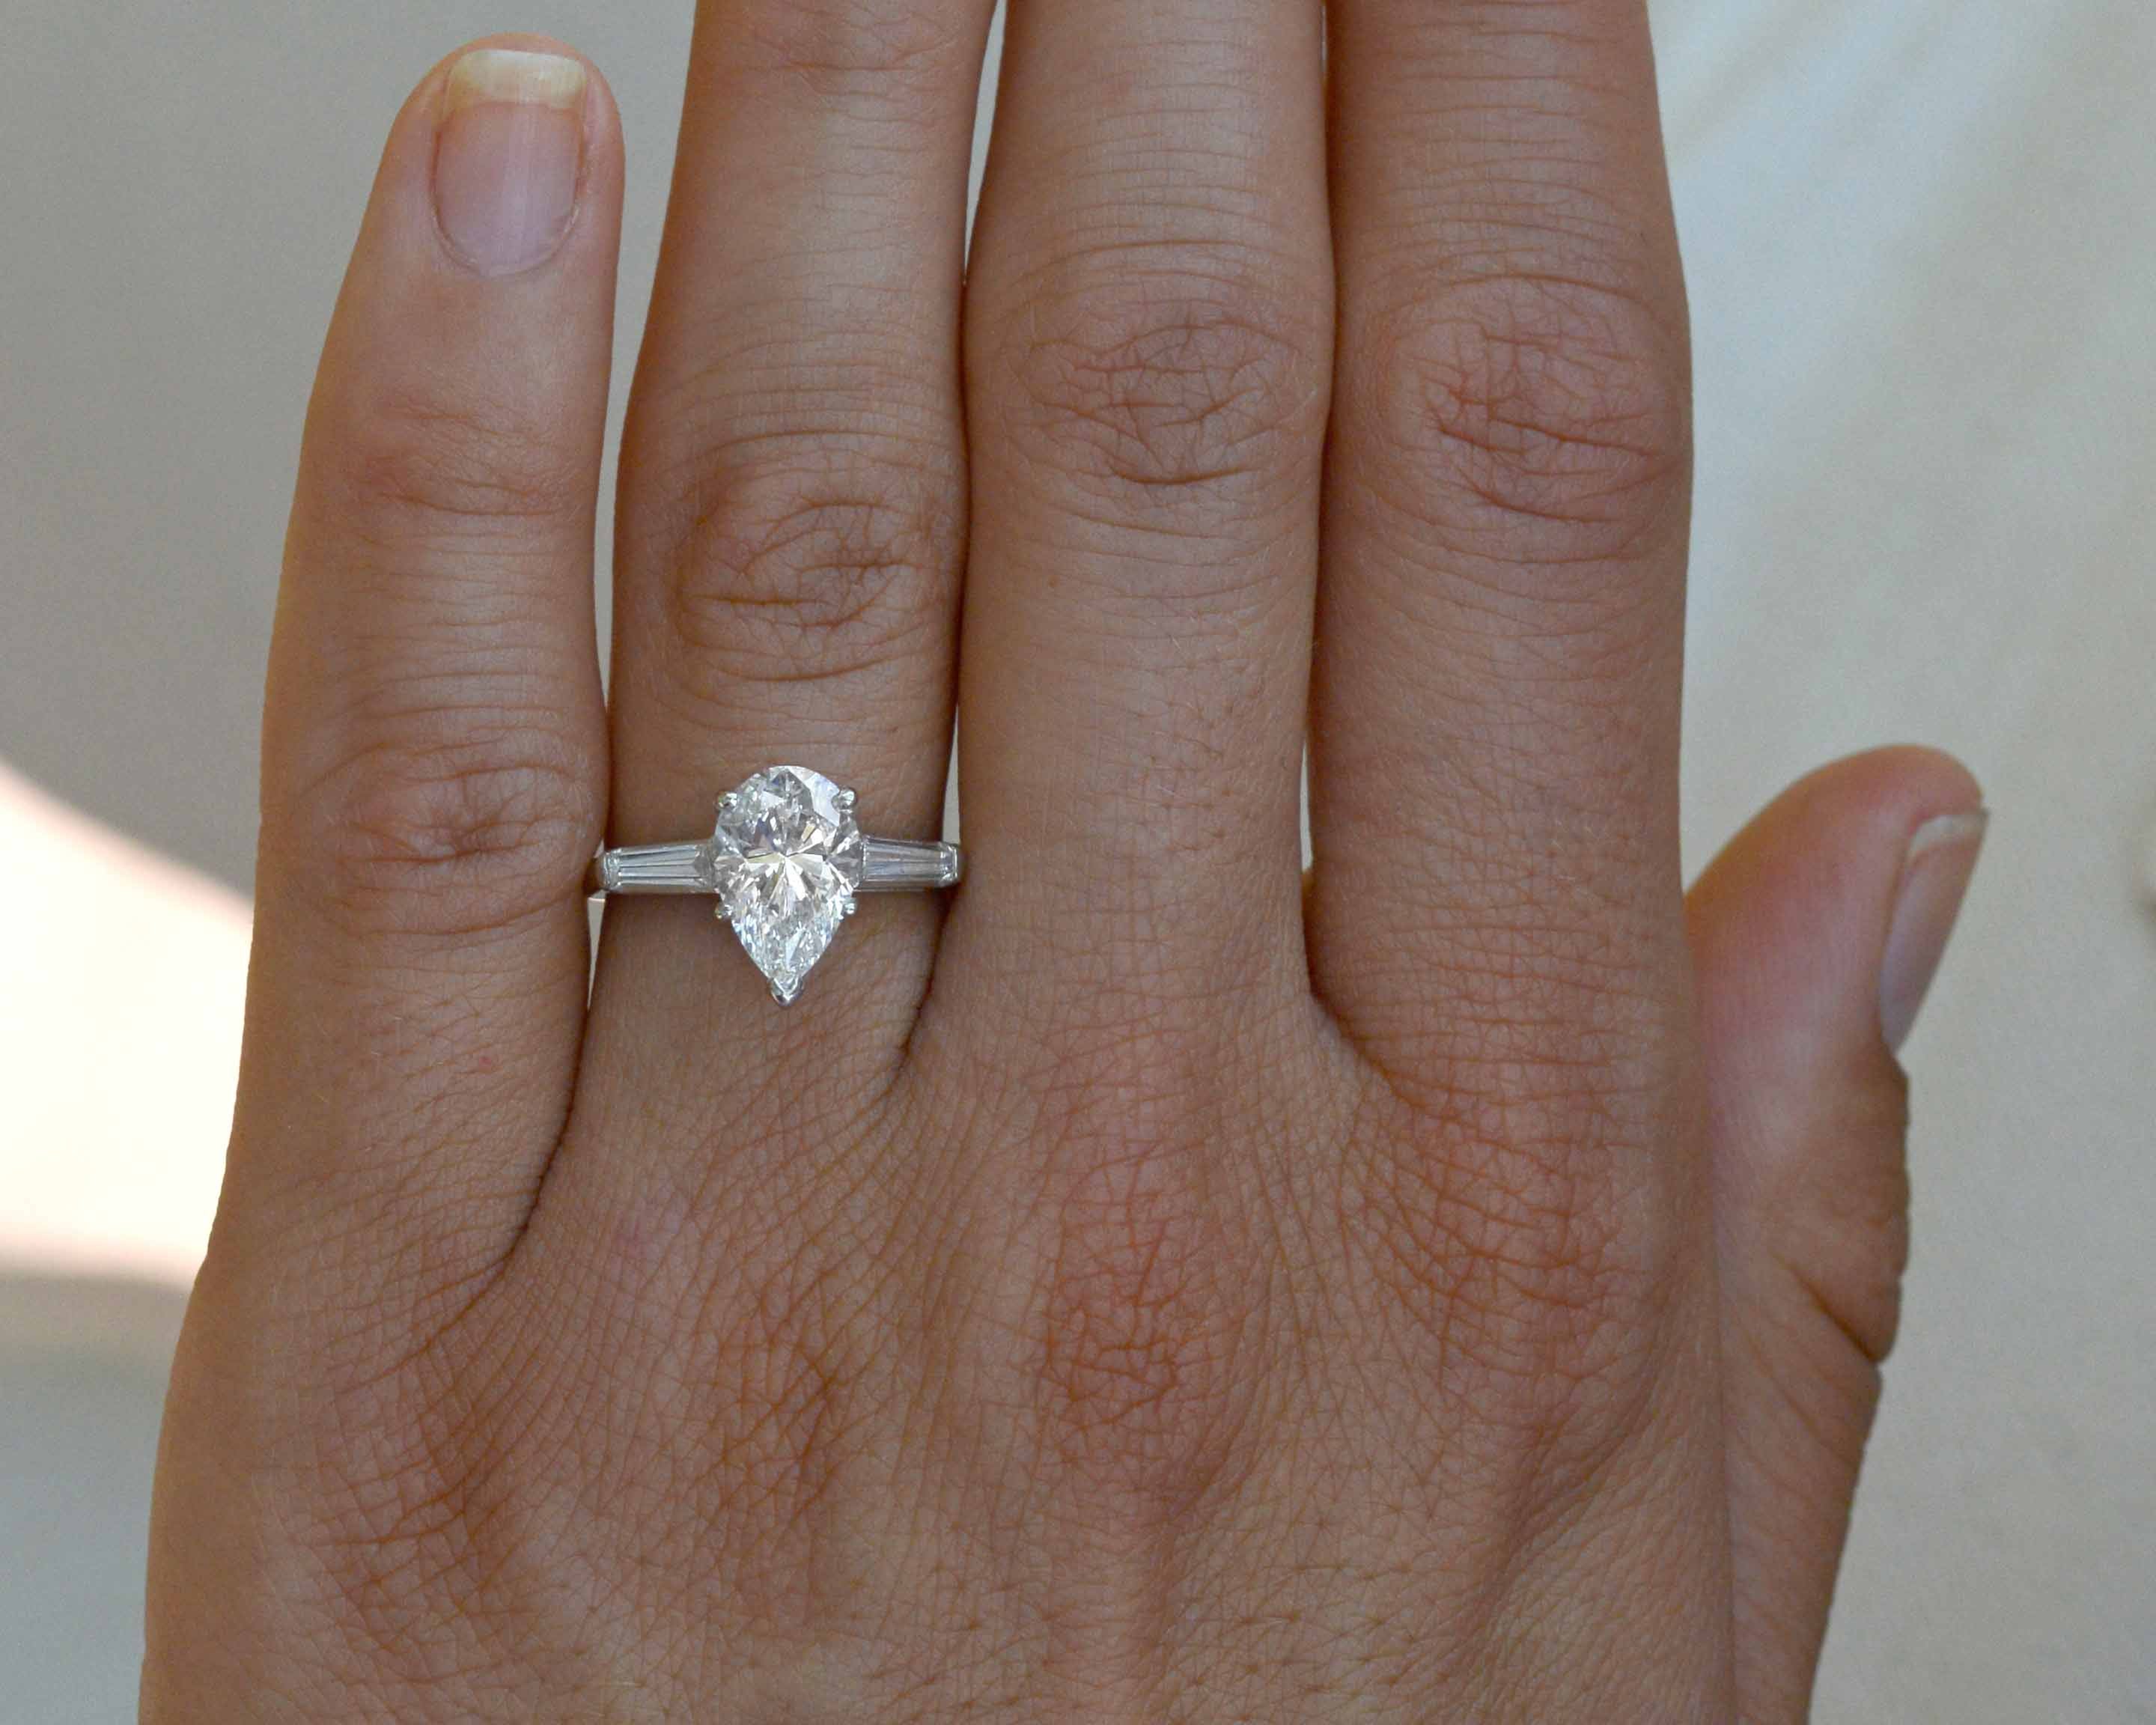 A GIA certified 2 carat natural diamond solitaire engagement ring.